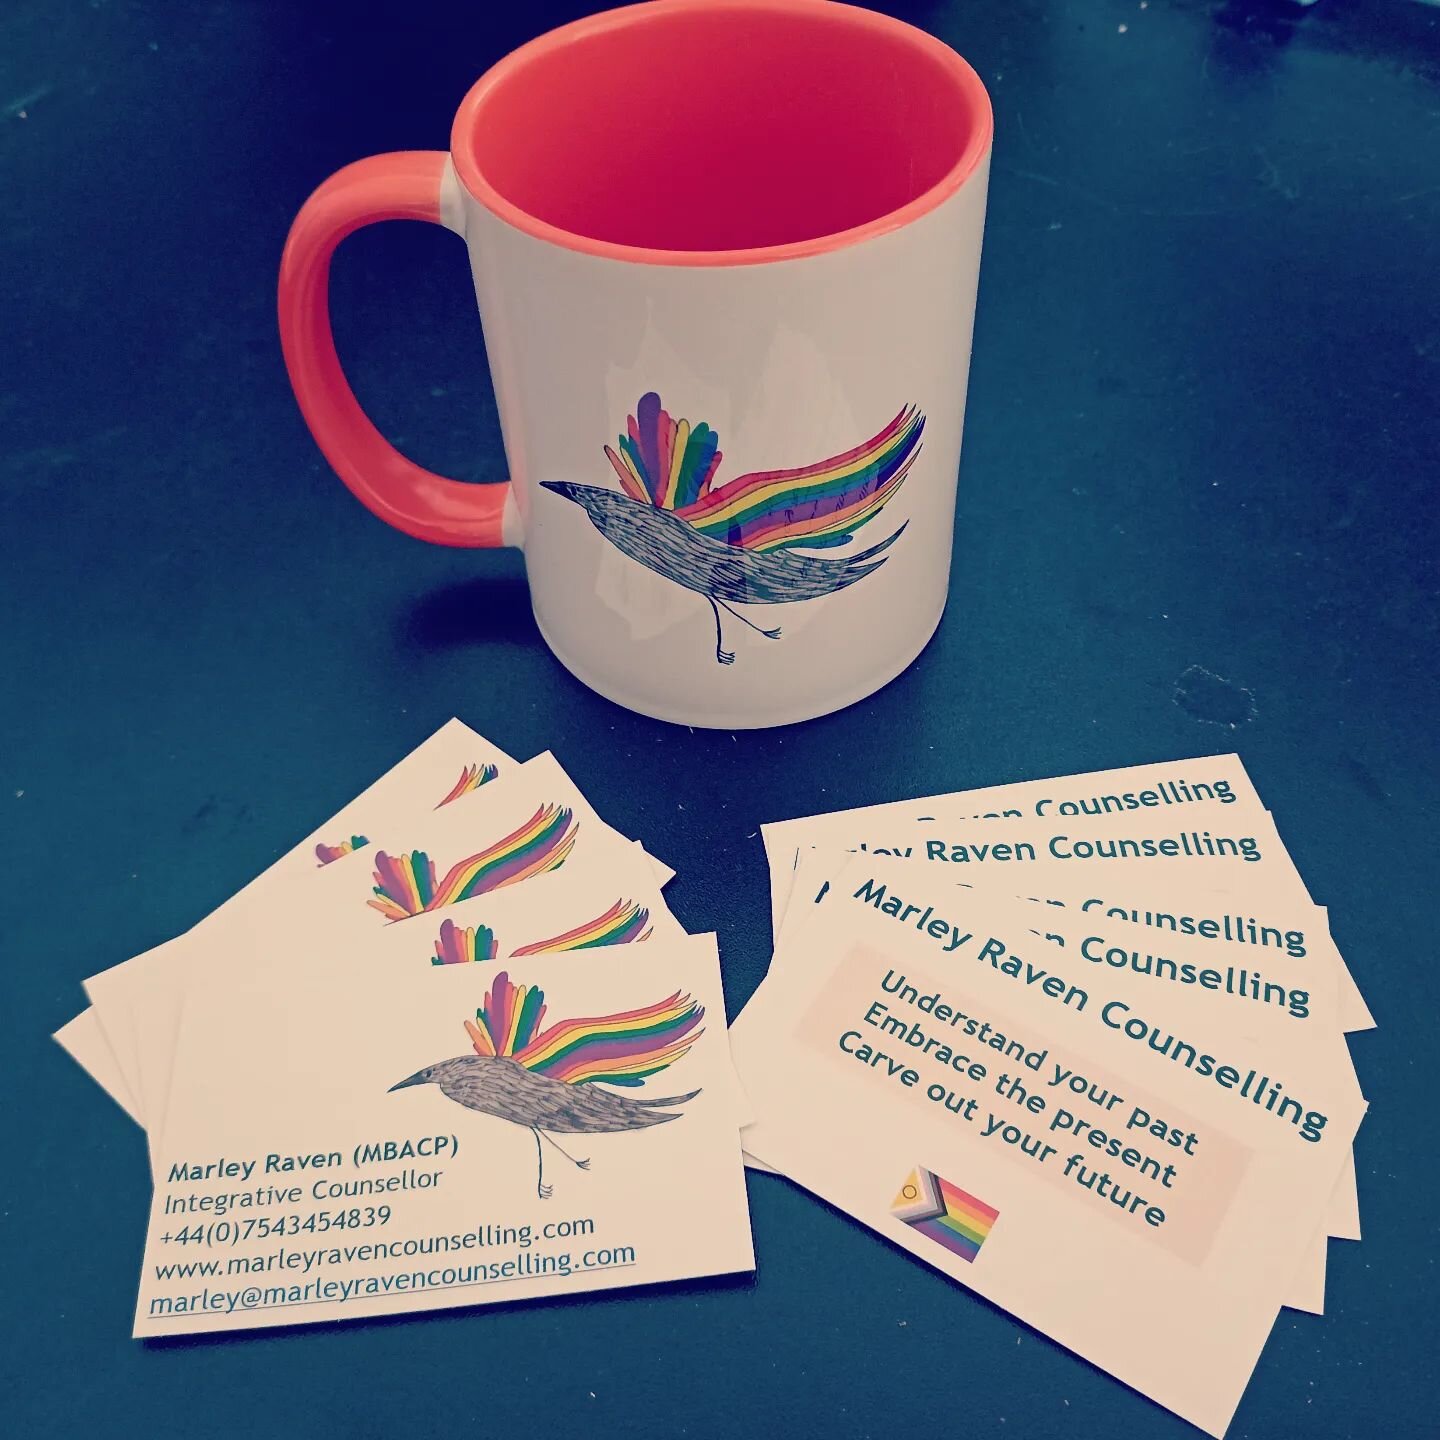 Very happy with my new mug and business cards from @vistaprint :)

What colour inside and handle do you think the client mug should have? The one with the most votes will become a reality.
The options are: Red, Orange, Yellow, Green, Blue, Pink, Whit